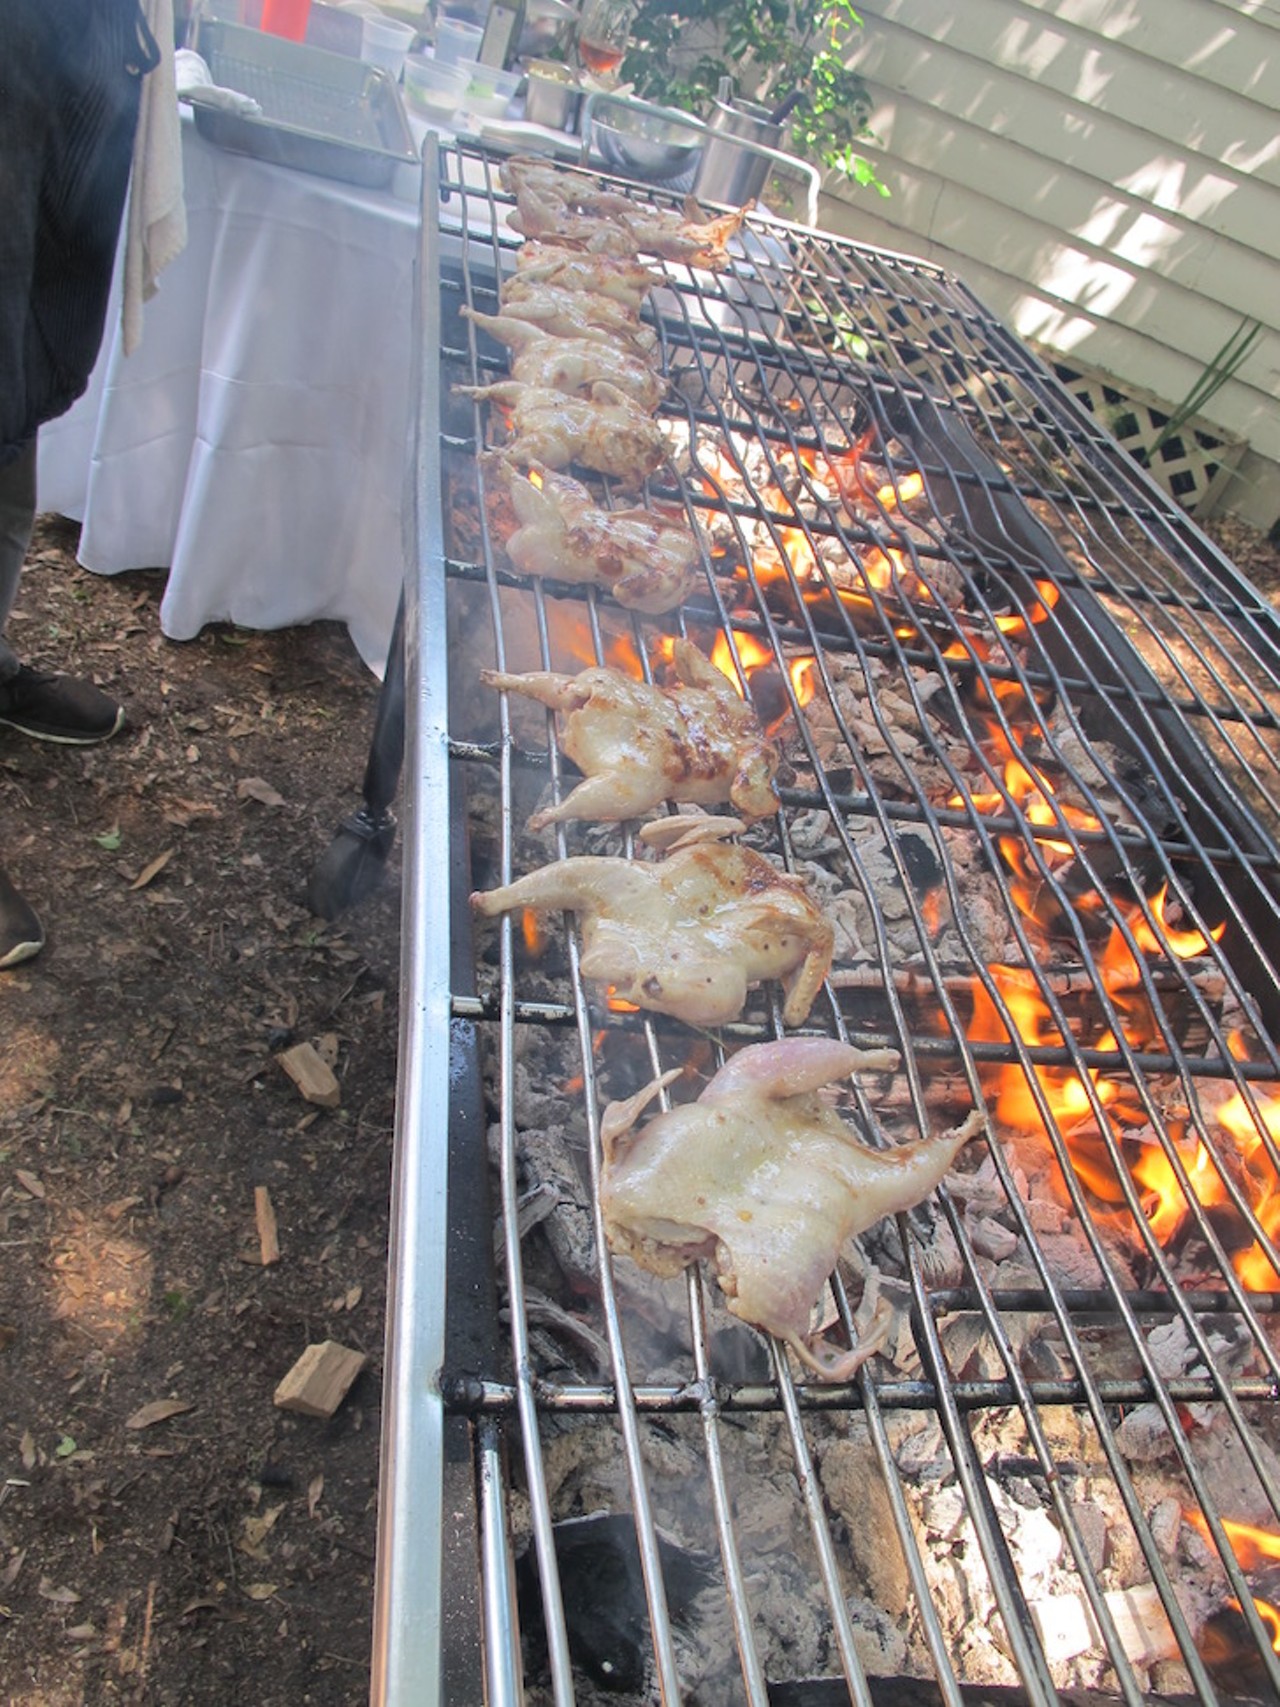 Quail being duly grilled